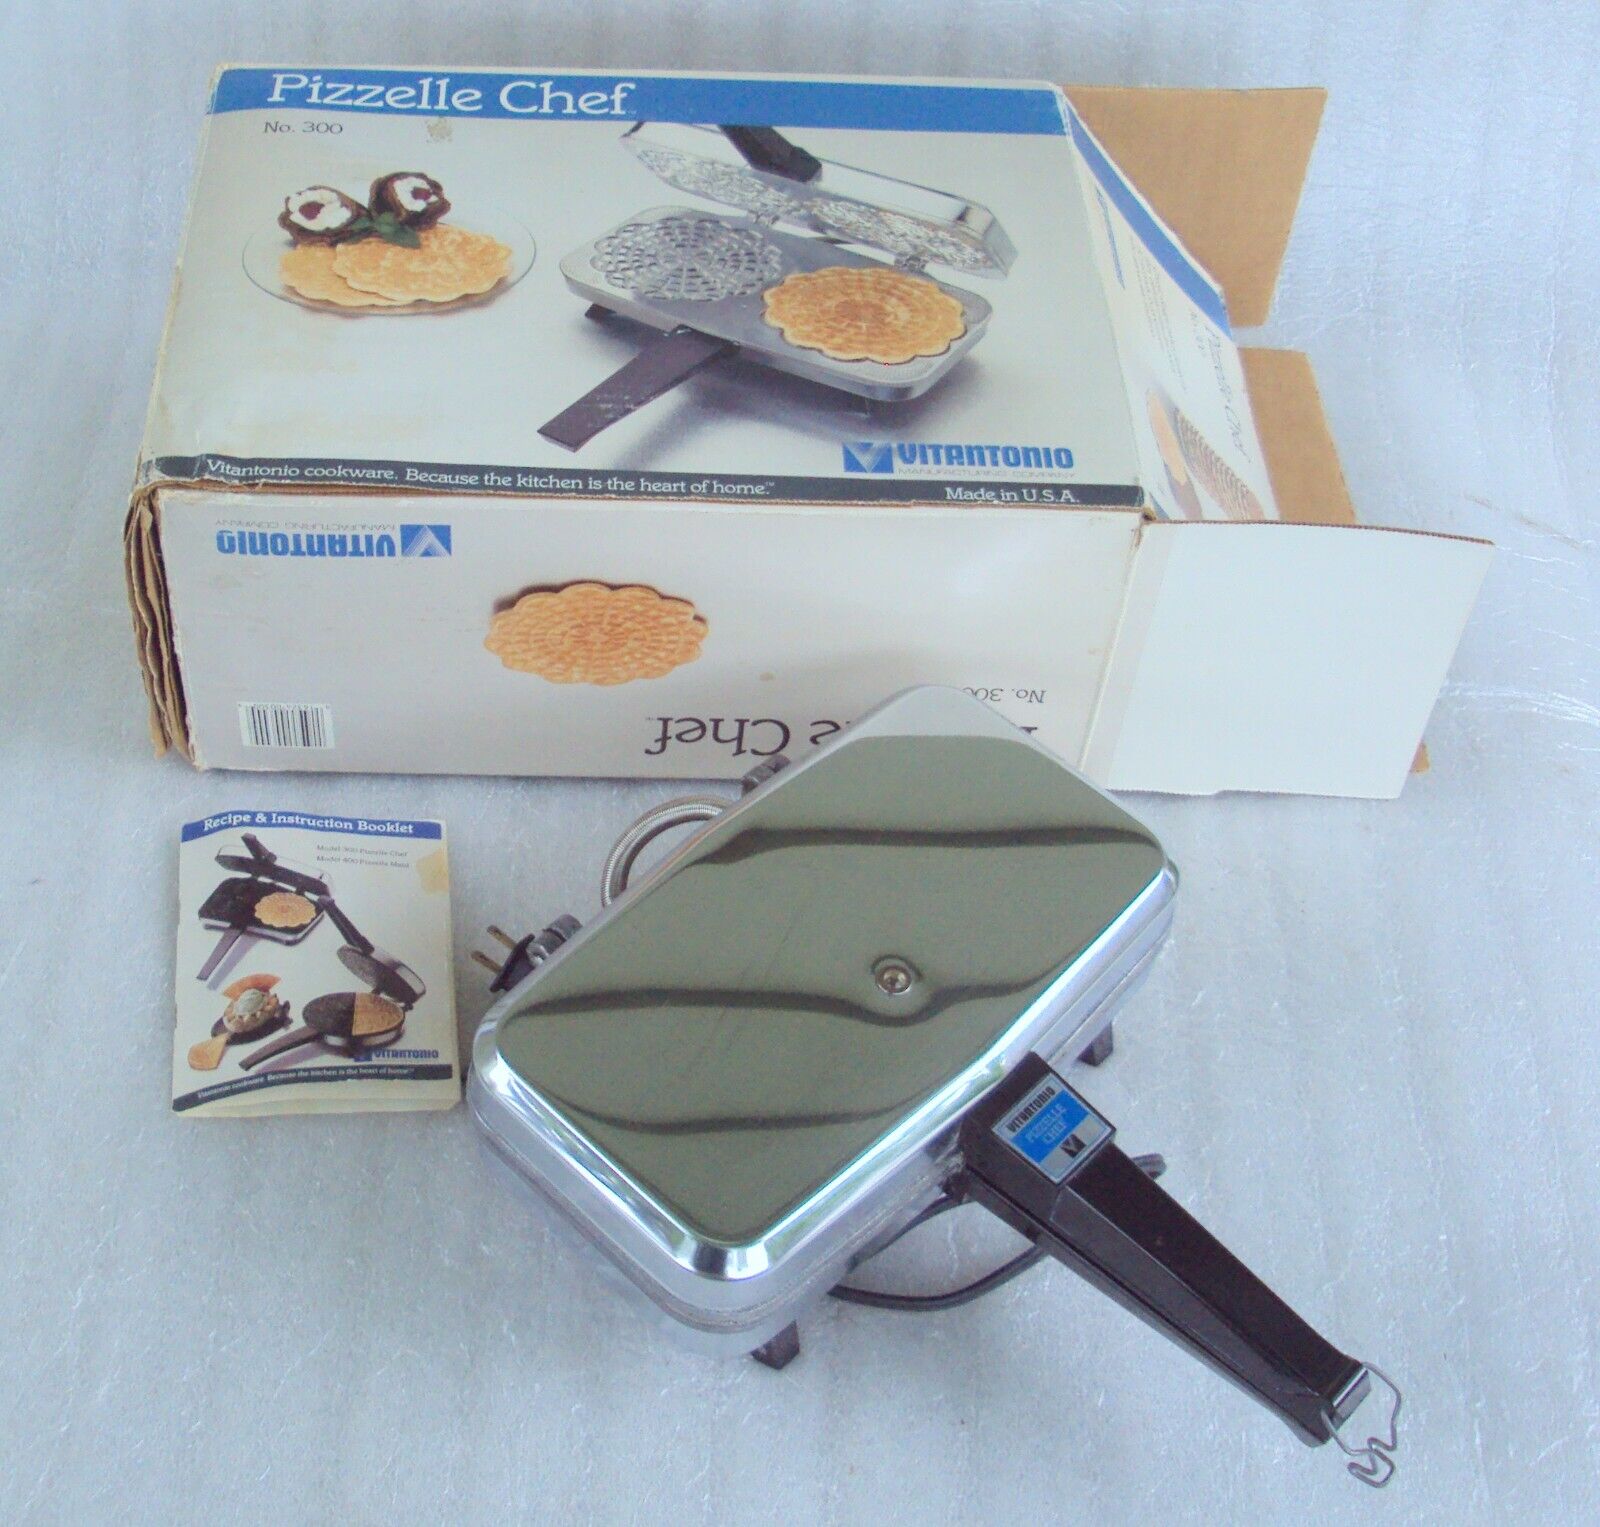 Vintage Vitantonio Pizzelle Chef 300A Italian Cookie Maker Tested & Works